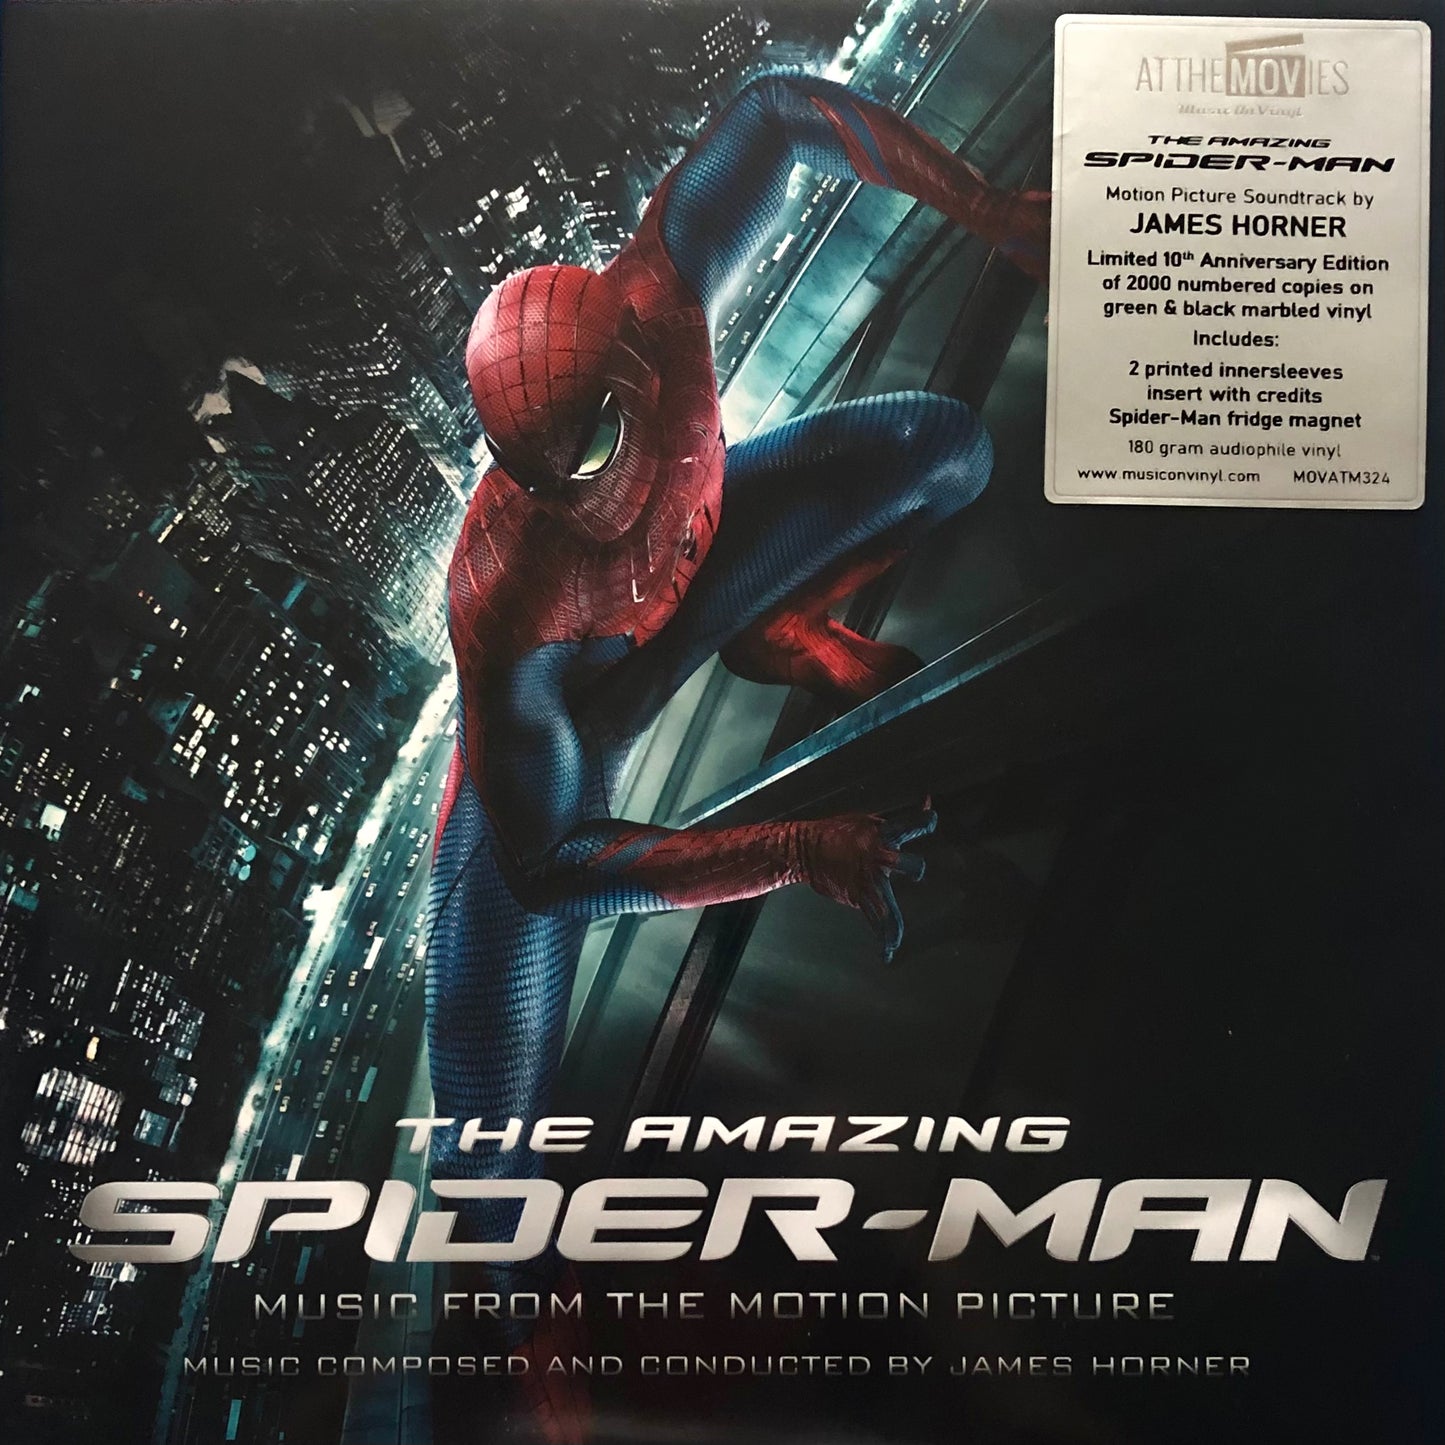 The Amazing Spider Man: Music from The Motion Picture (Limited Edition Numbered 2XLP 180g Green & Black Marbled Vinyl)